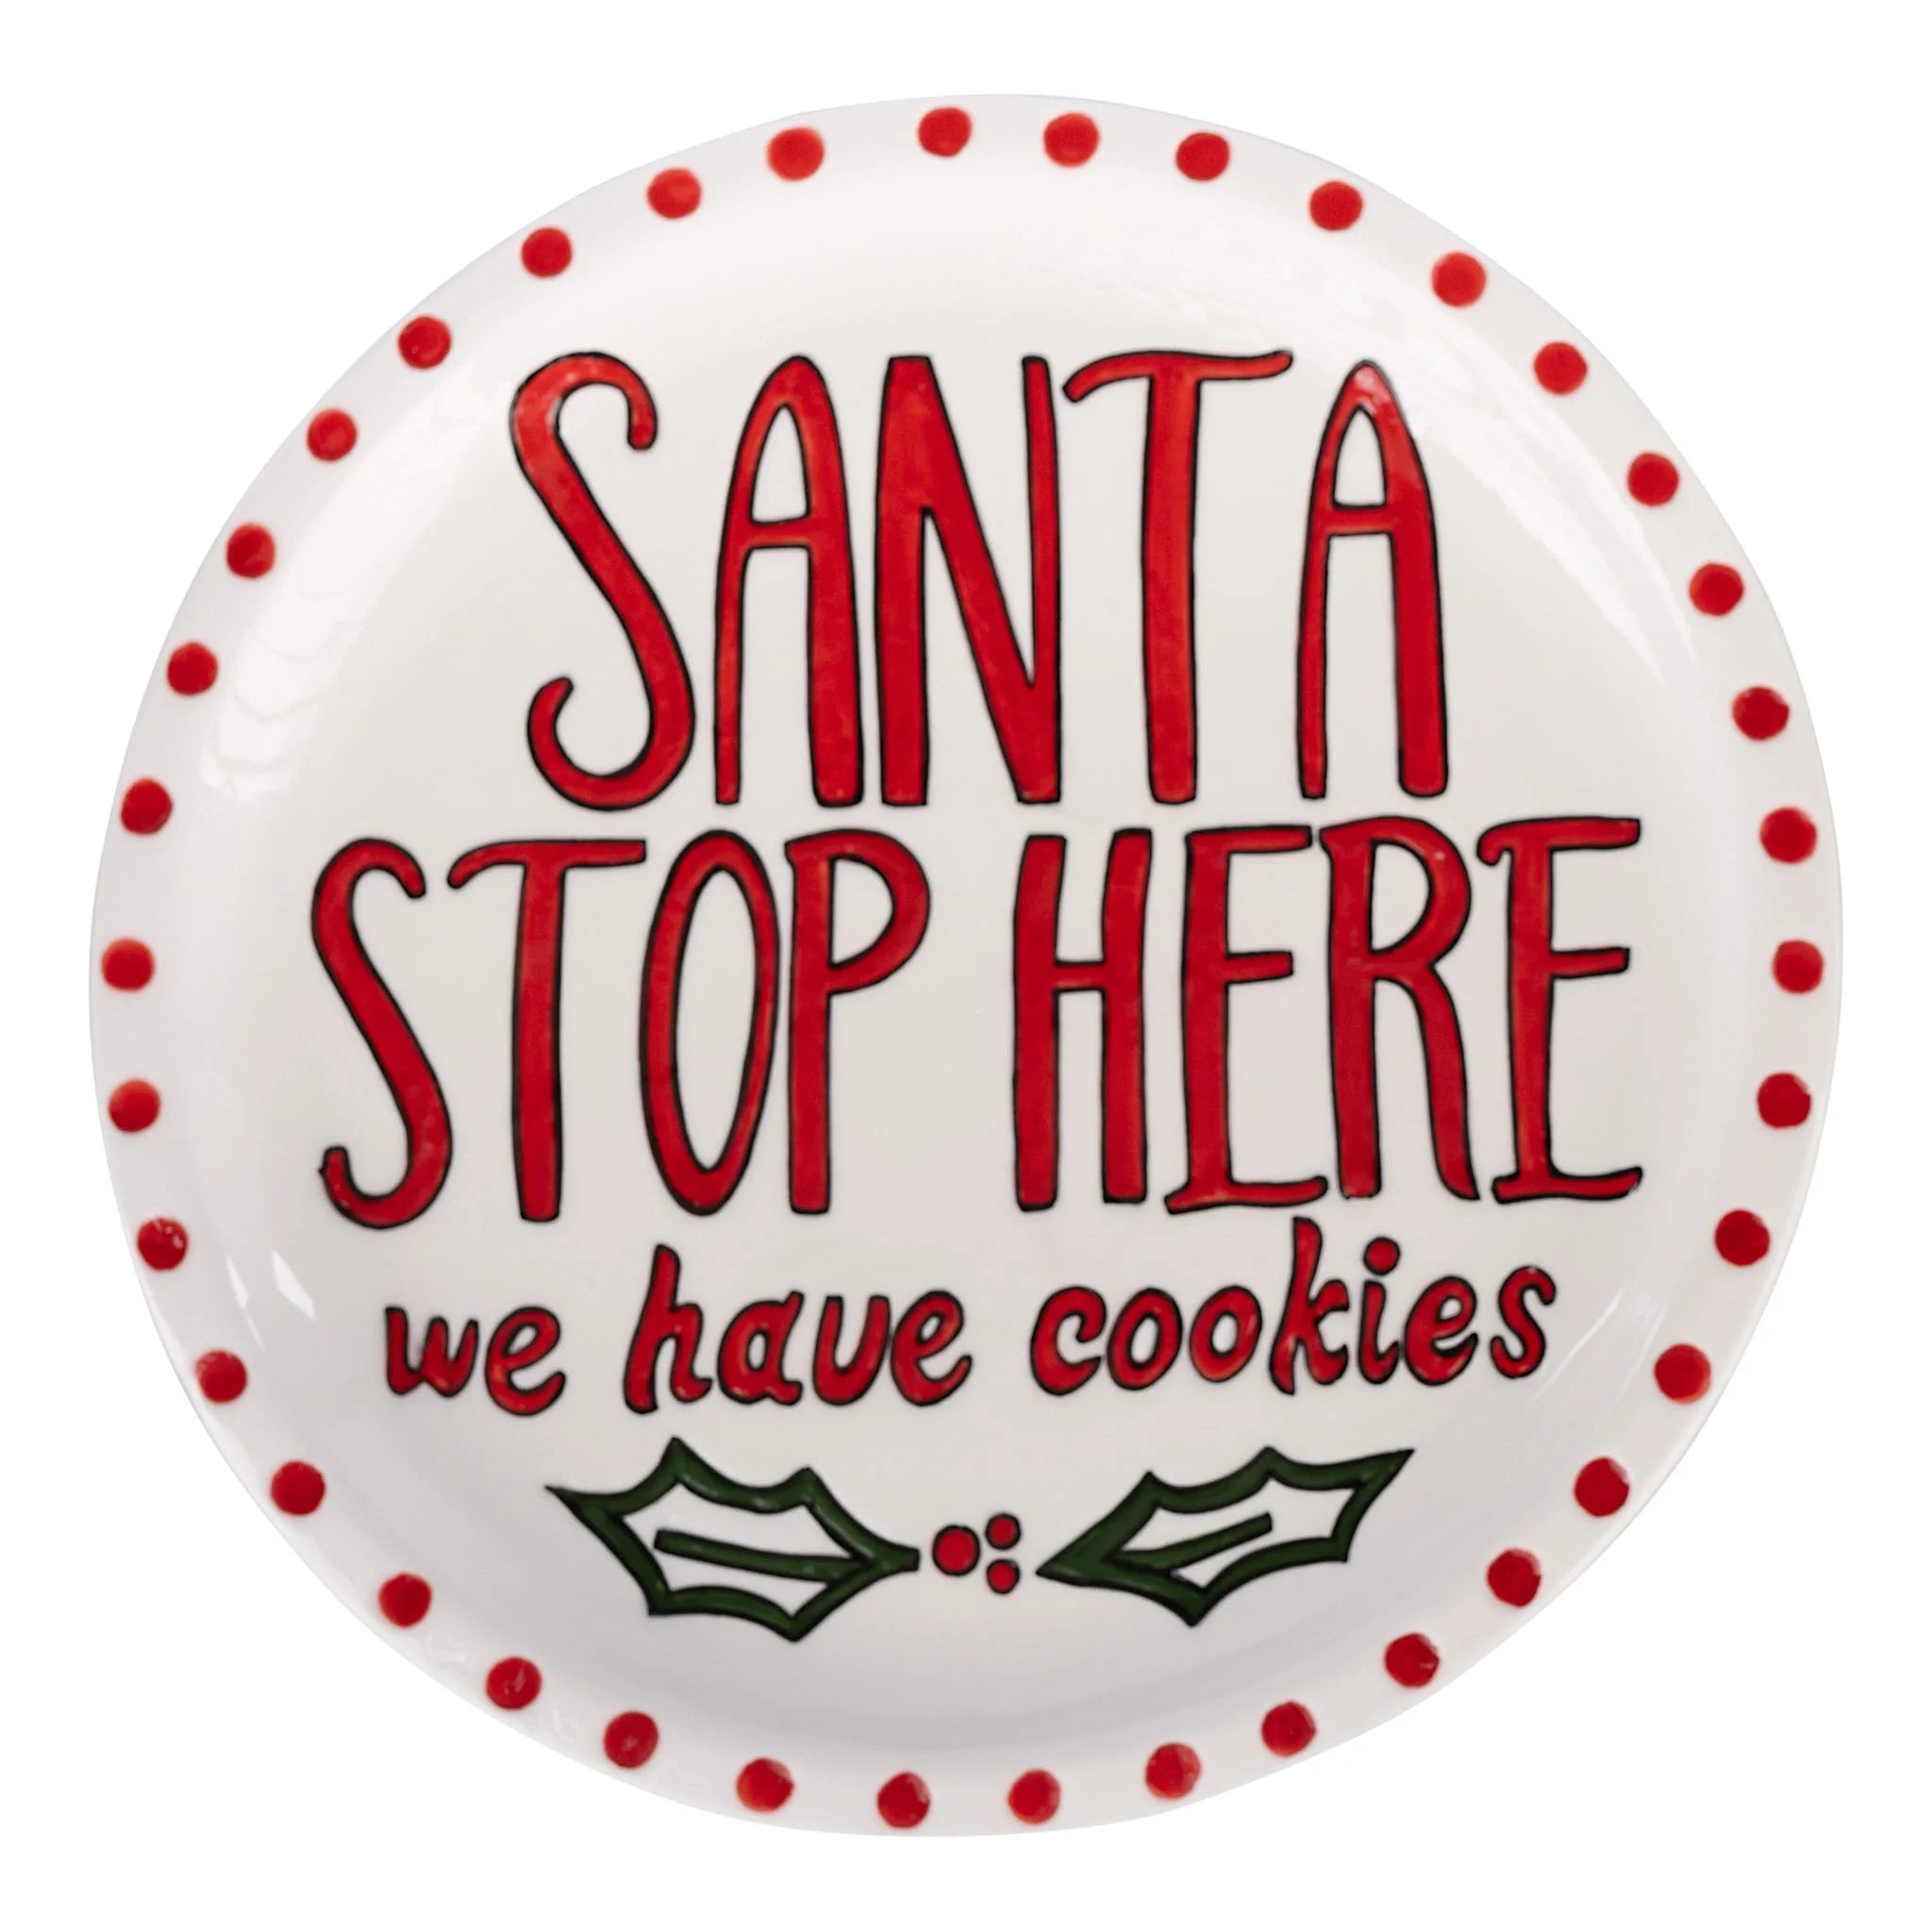 Santa Stop Here Plate and Milk Bottle